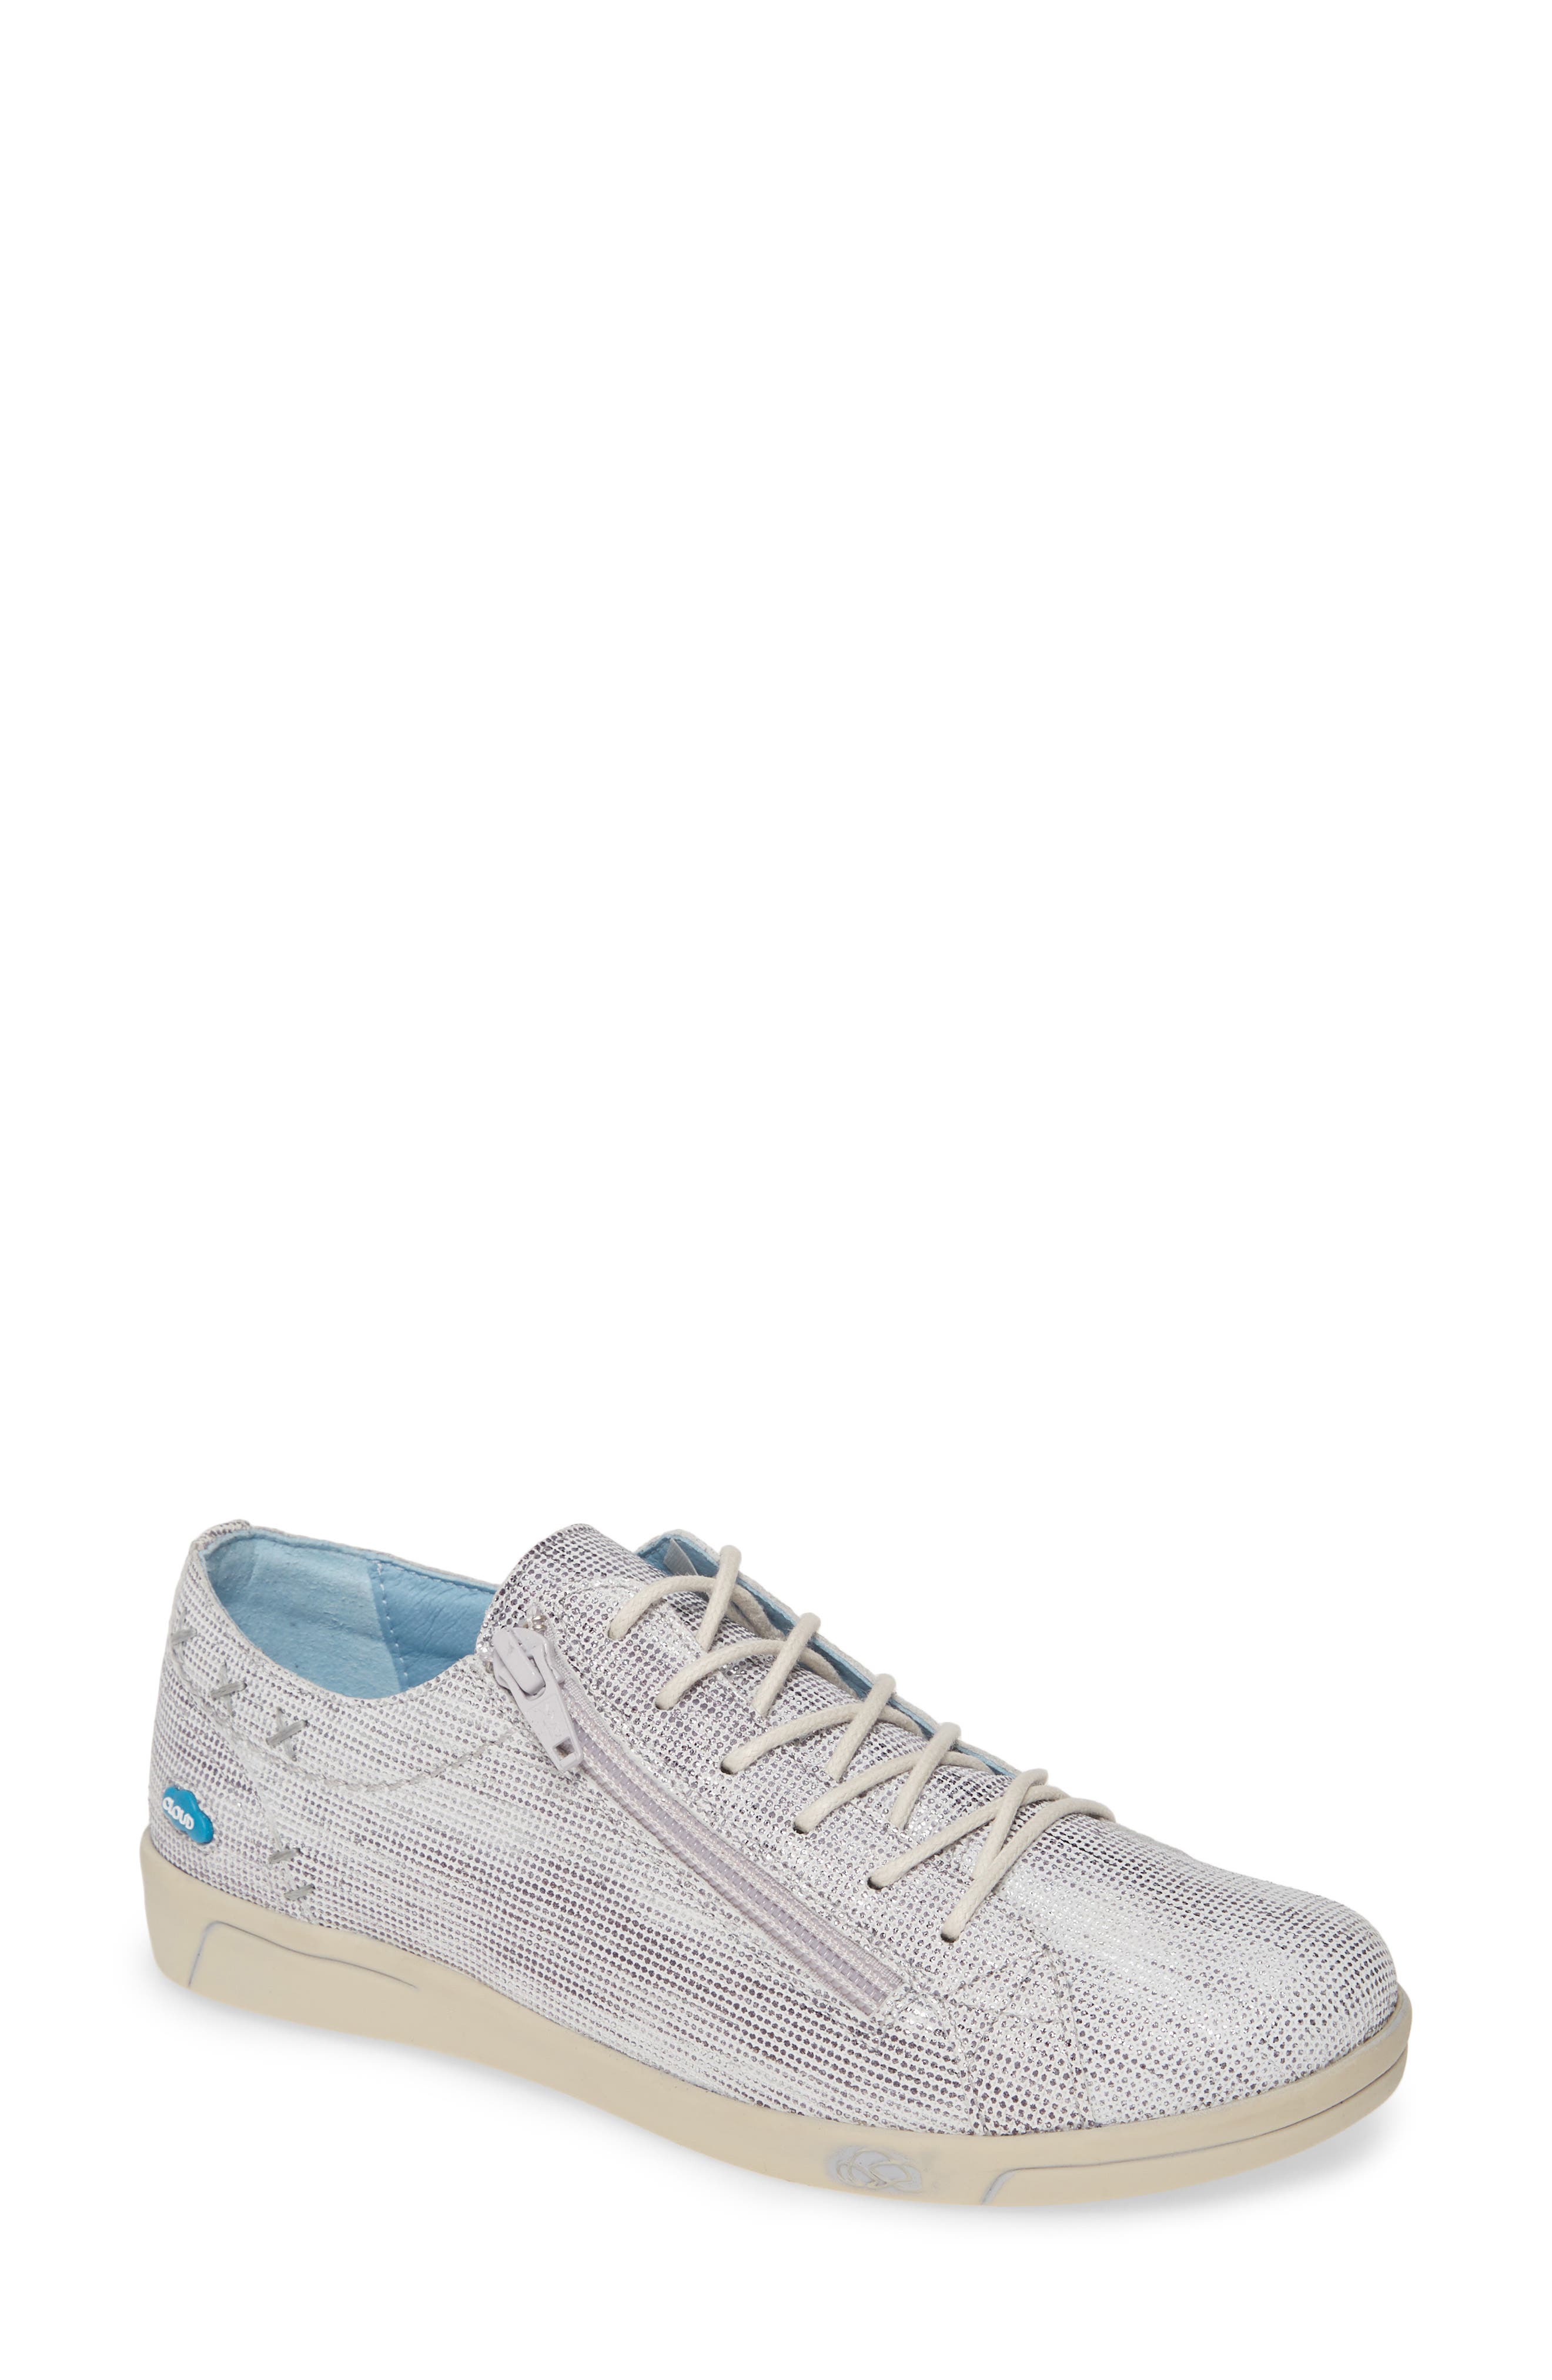 nordstrom on cloud shoes